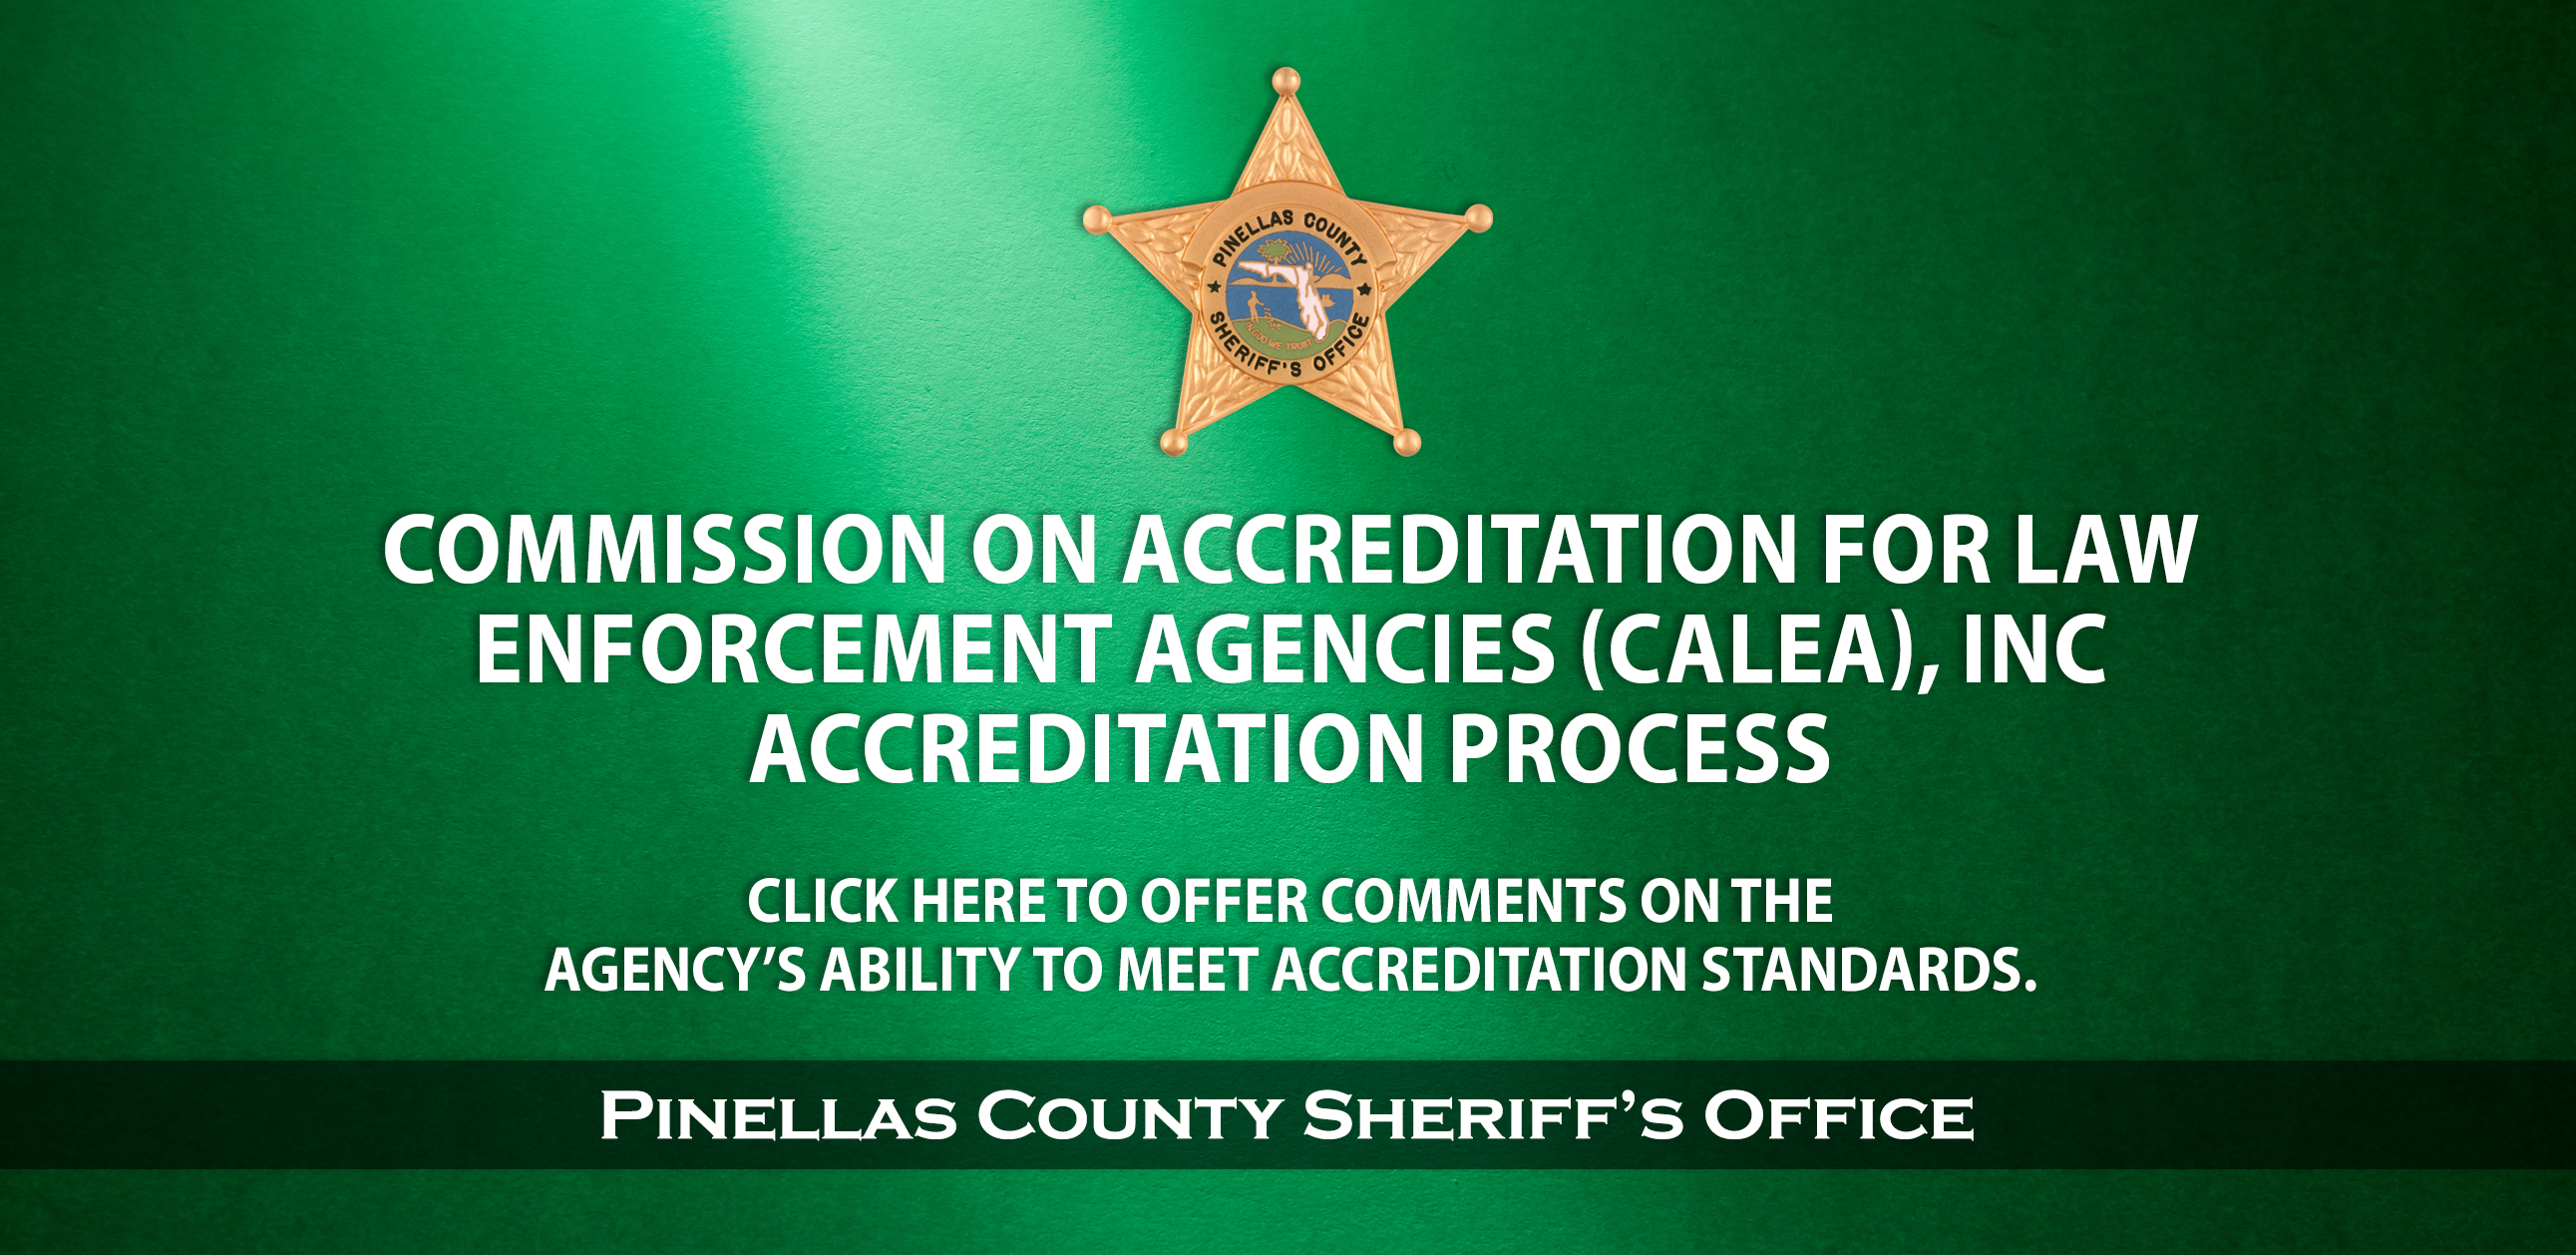 Commission Accreditation for Law Enforcement Agencies(CALEA),Inc, Accreditation Process; Click Here to offer comments on the agency's ability to meet accreditation standards